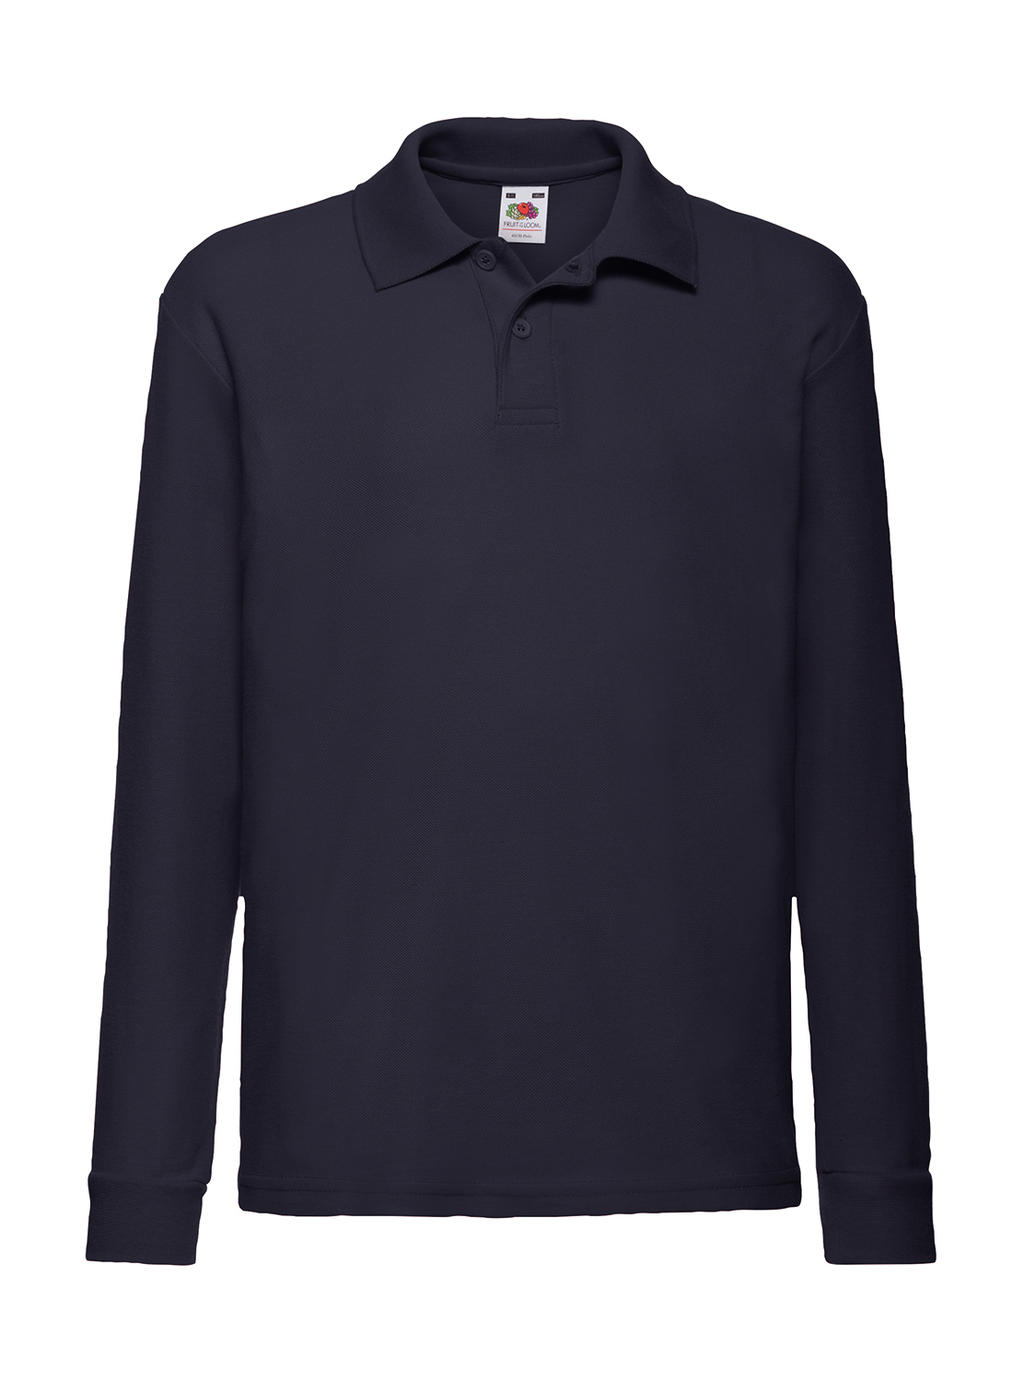  Kids 65/35 Long Sleeve Polo in Farbe Deep Navy